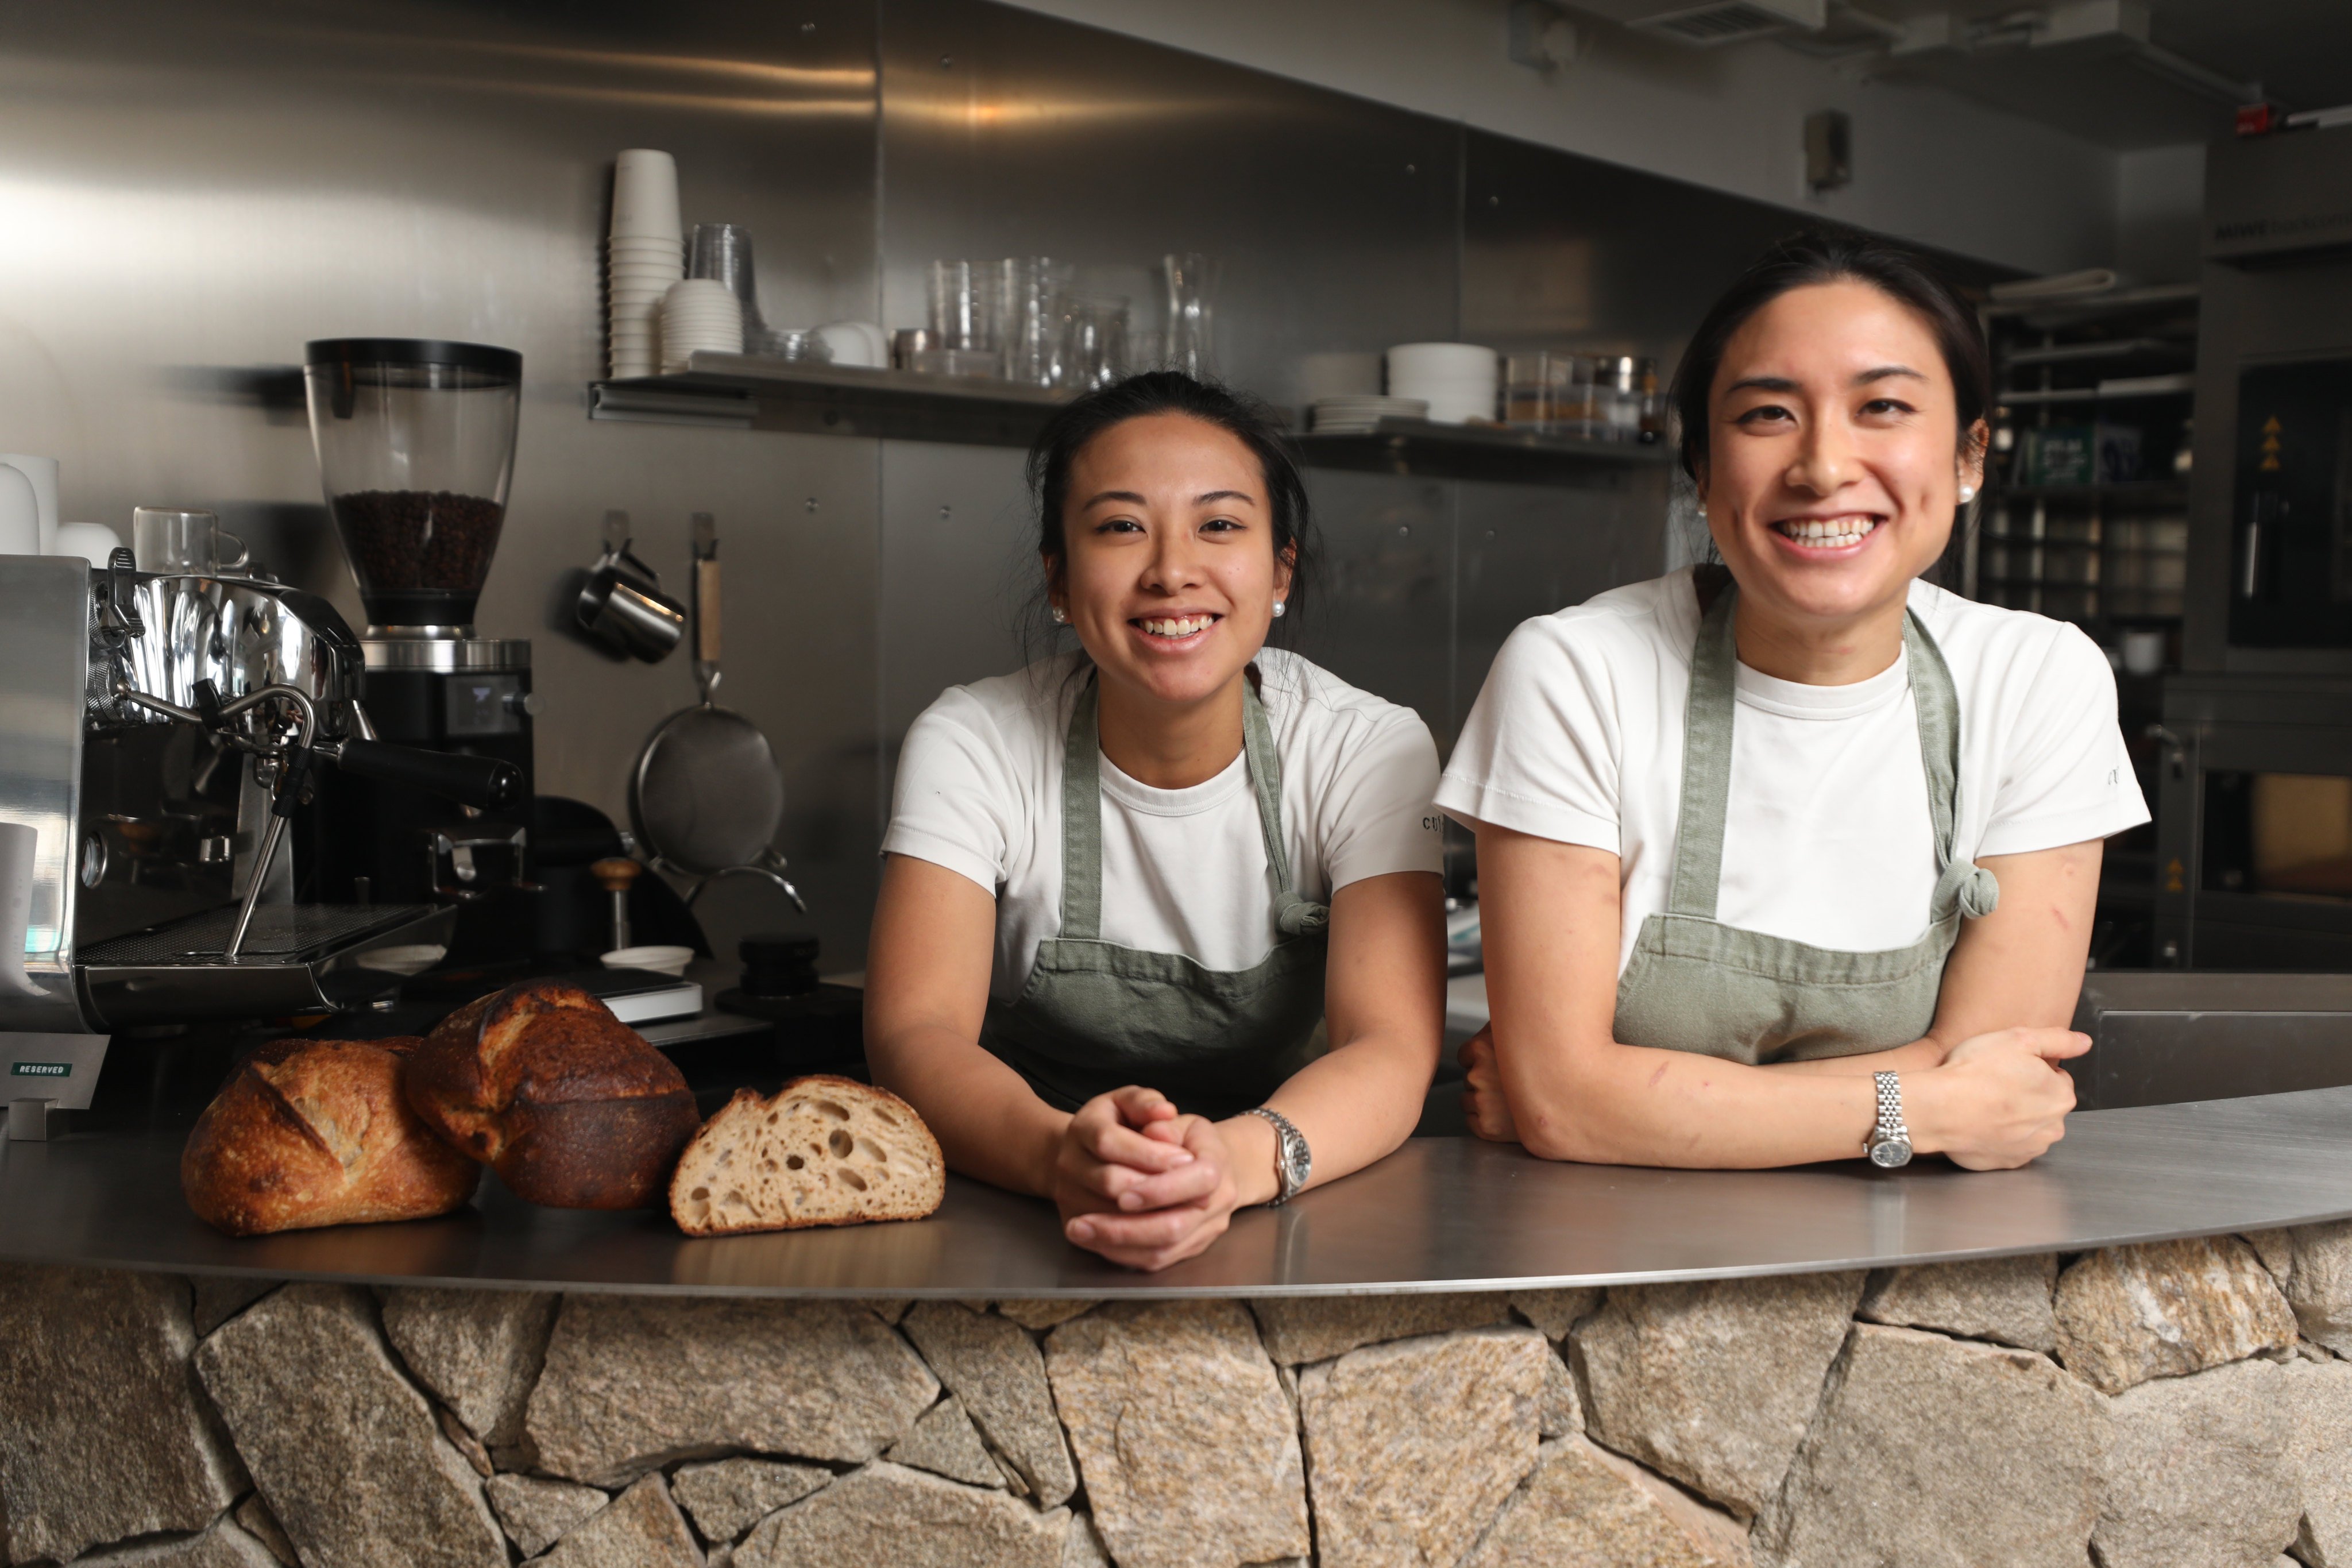 Sisters Stephanie (left) and Tiffany Tse at their bakery Cuít in Sai Kung. Cuít has upped the bakery game in Hong Kong with its flavoured sourdough bread, sandwiches and pastries. Photo: Xiaomei Chen